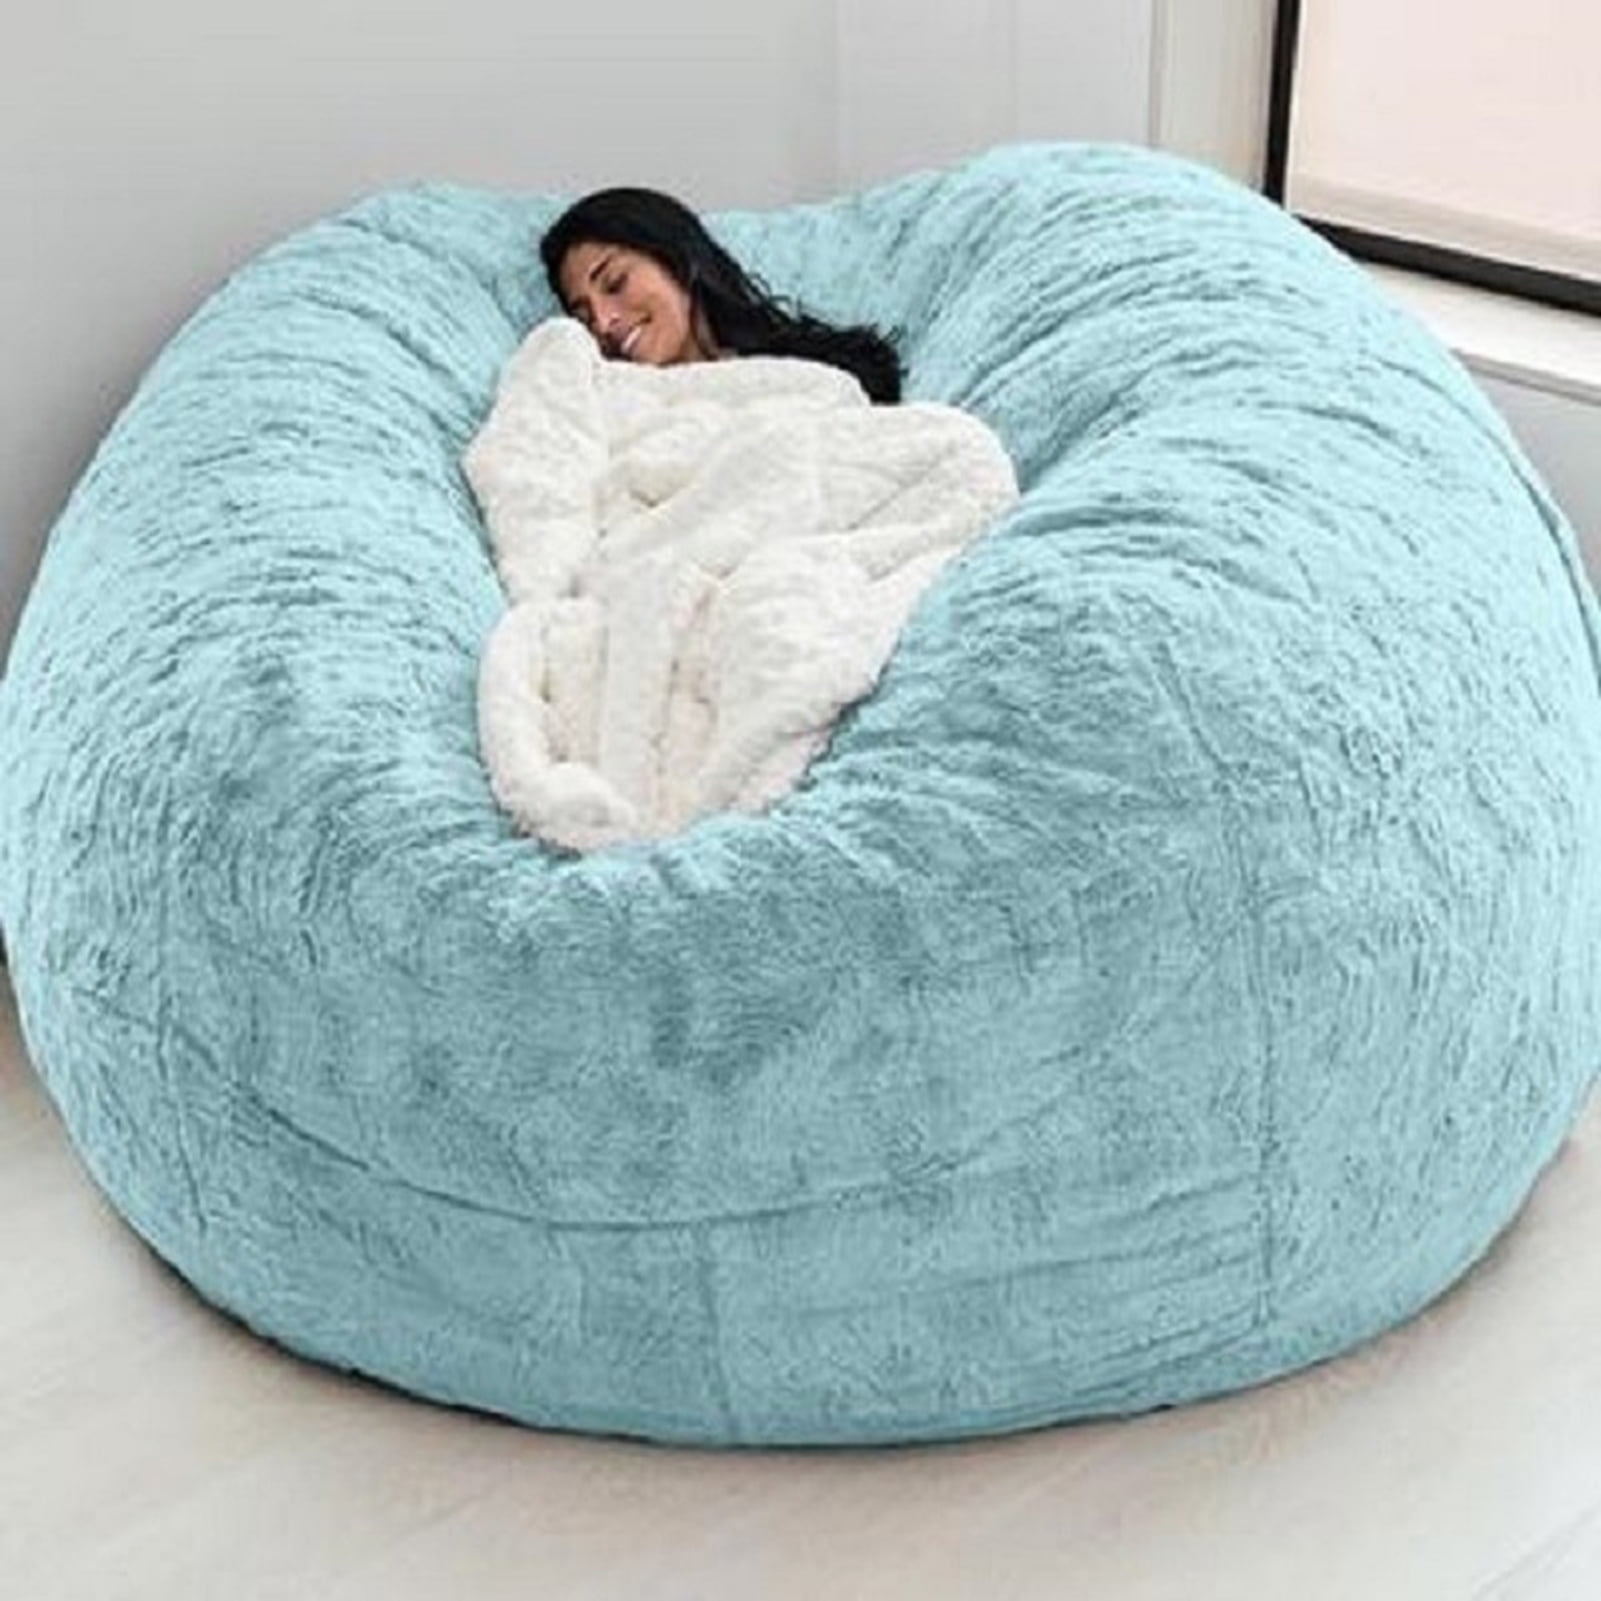 Lovesac Bean Bag Cover 7FT Bean Bag Cover No Filler Suede Insulating Fabric  Sofas Faux Fur Sofa Living Room Chairs For Adults From Asite, $73.21